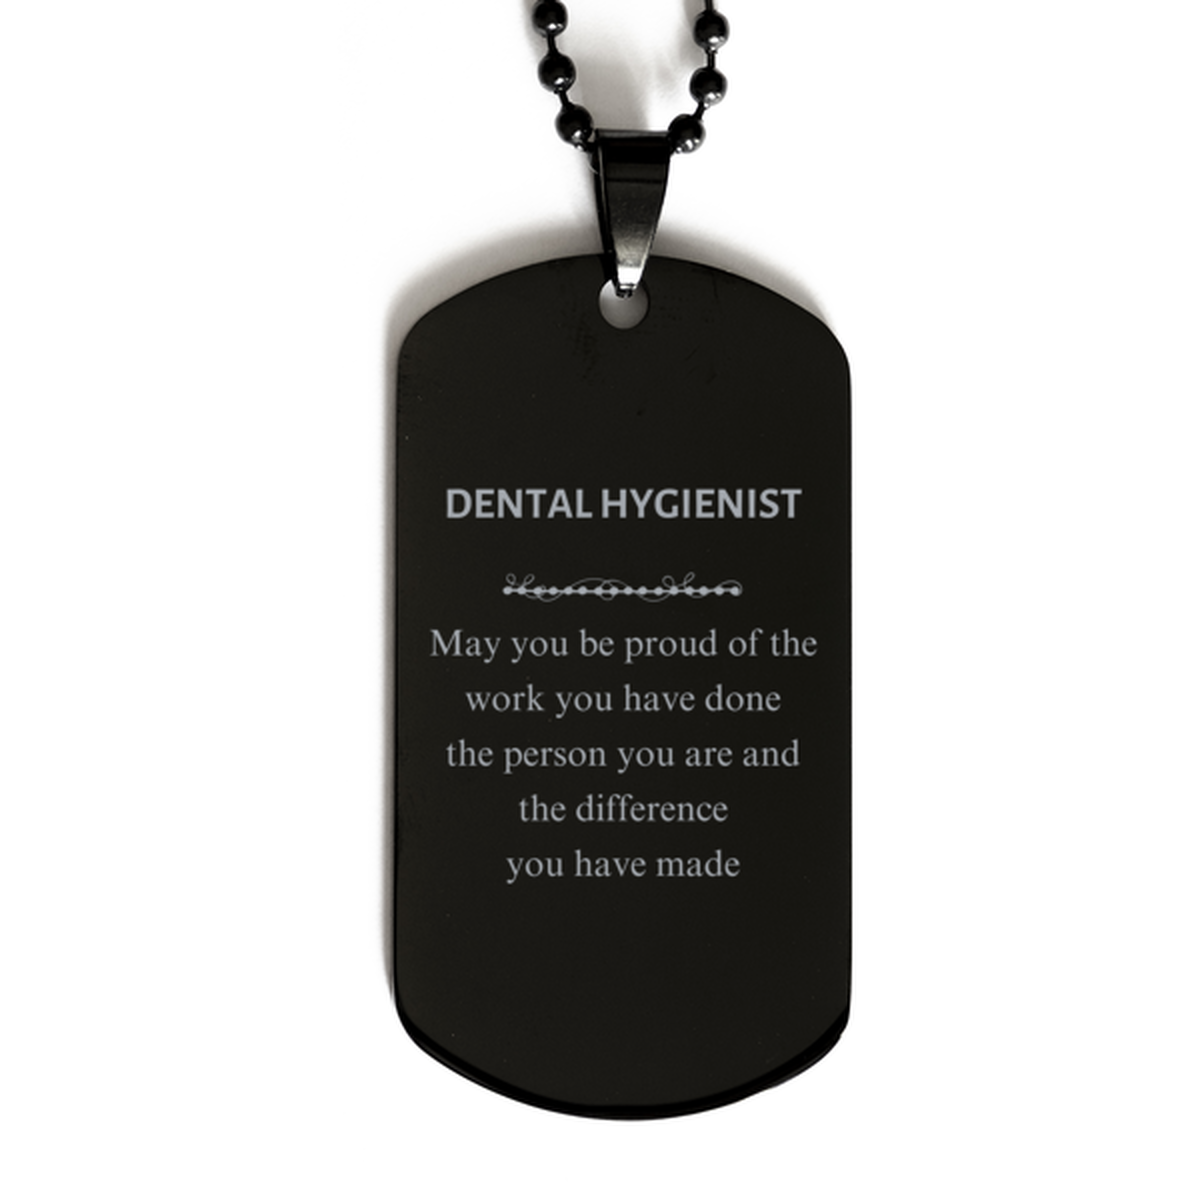 Dental Hygienist May you be proud of the work you have done, Retirement Dental Hygienist Black Dog Tag for Colleague Appreciation Gifts Amazing for Dental Hygienist